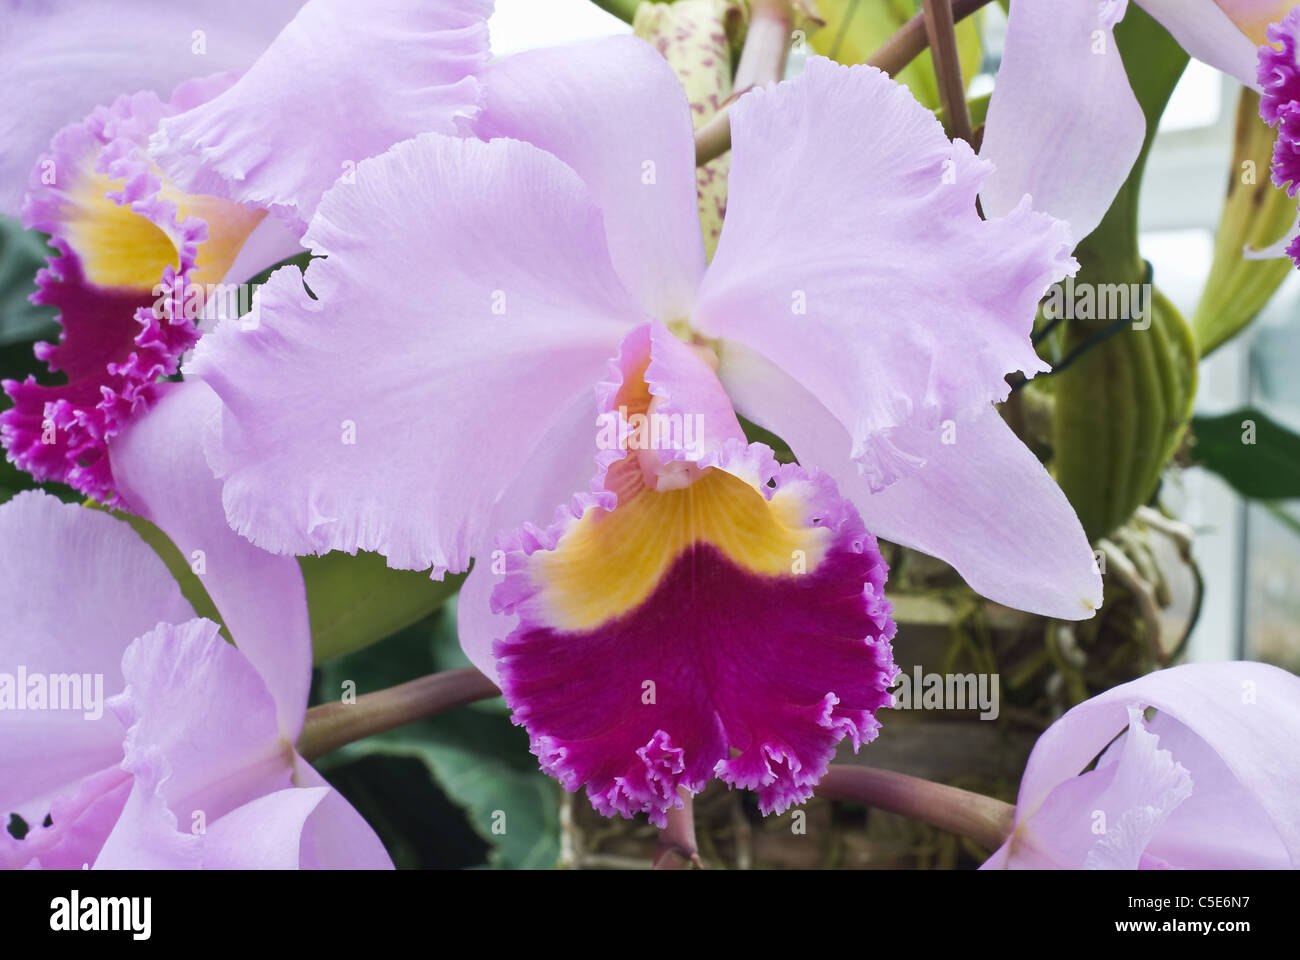 Orchid Flower as Symbol of Romance and Love Stock Photo